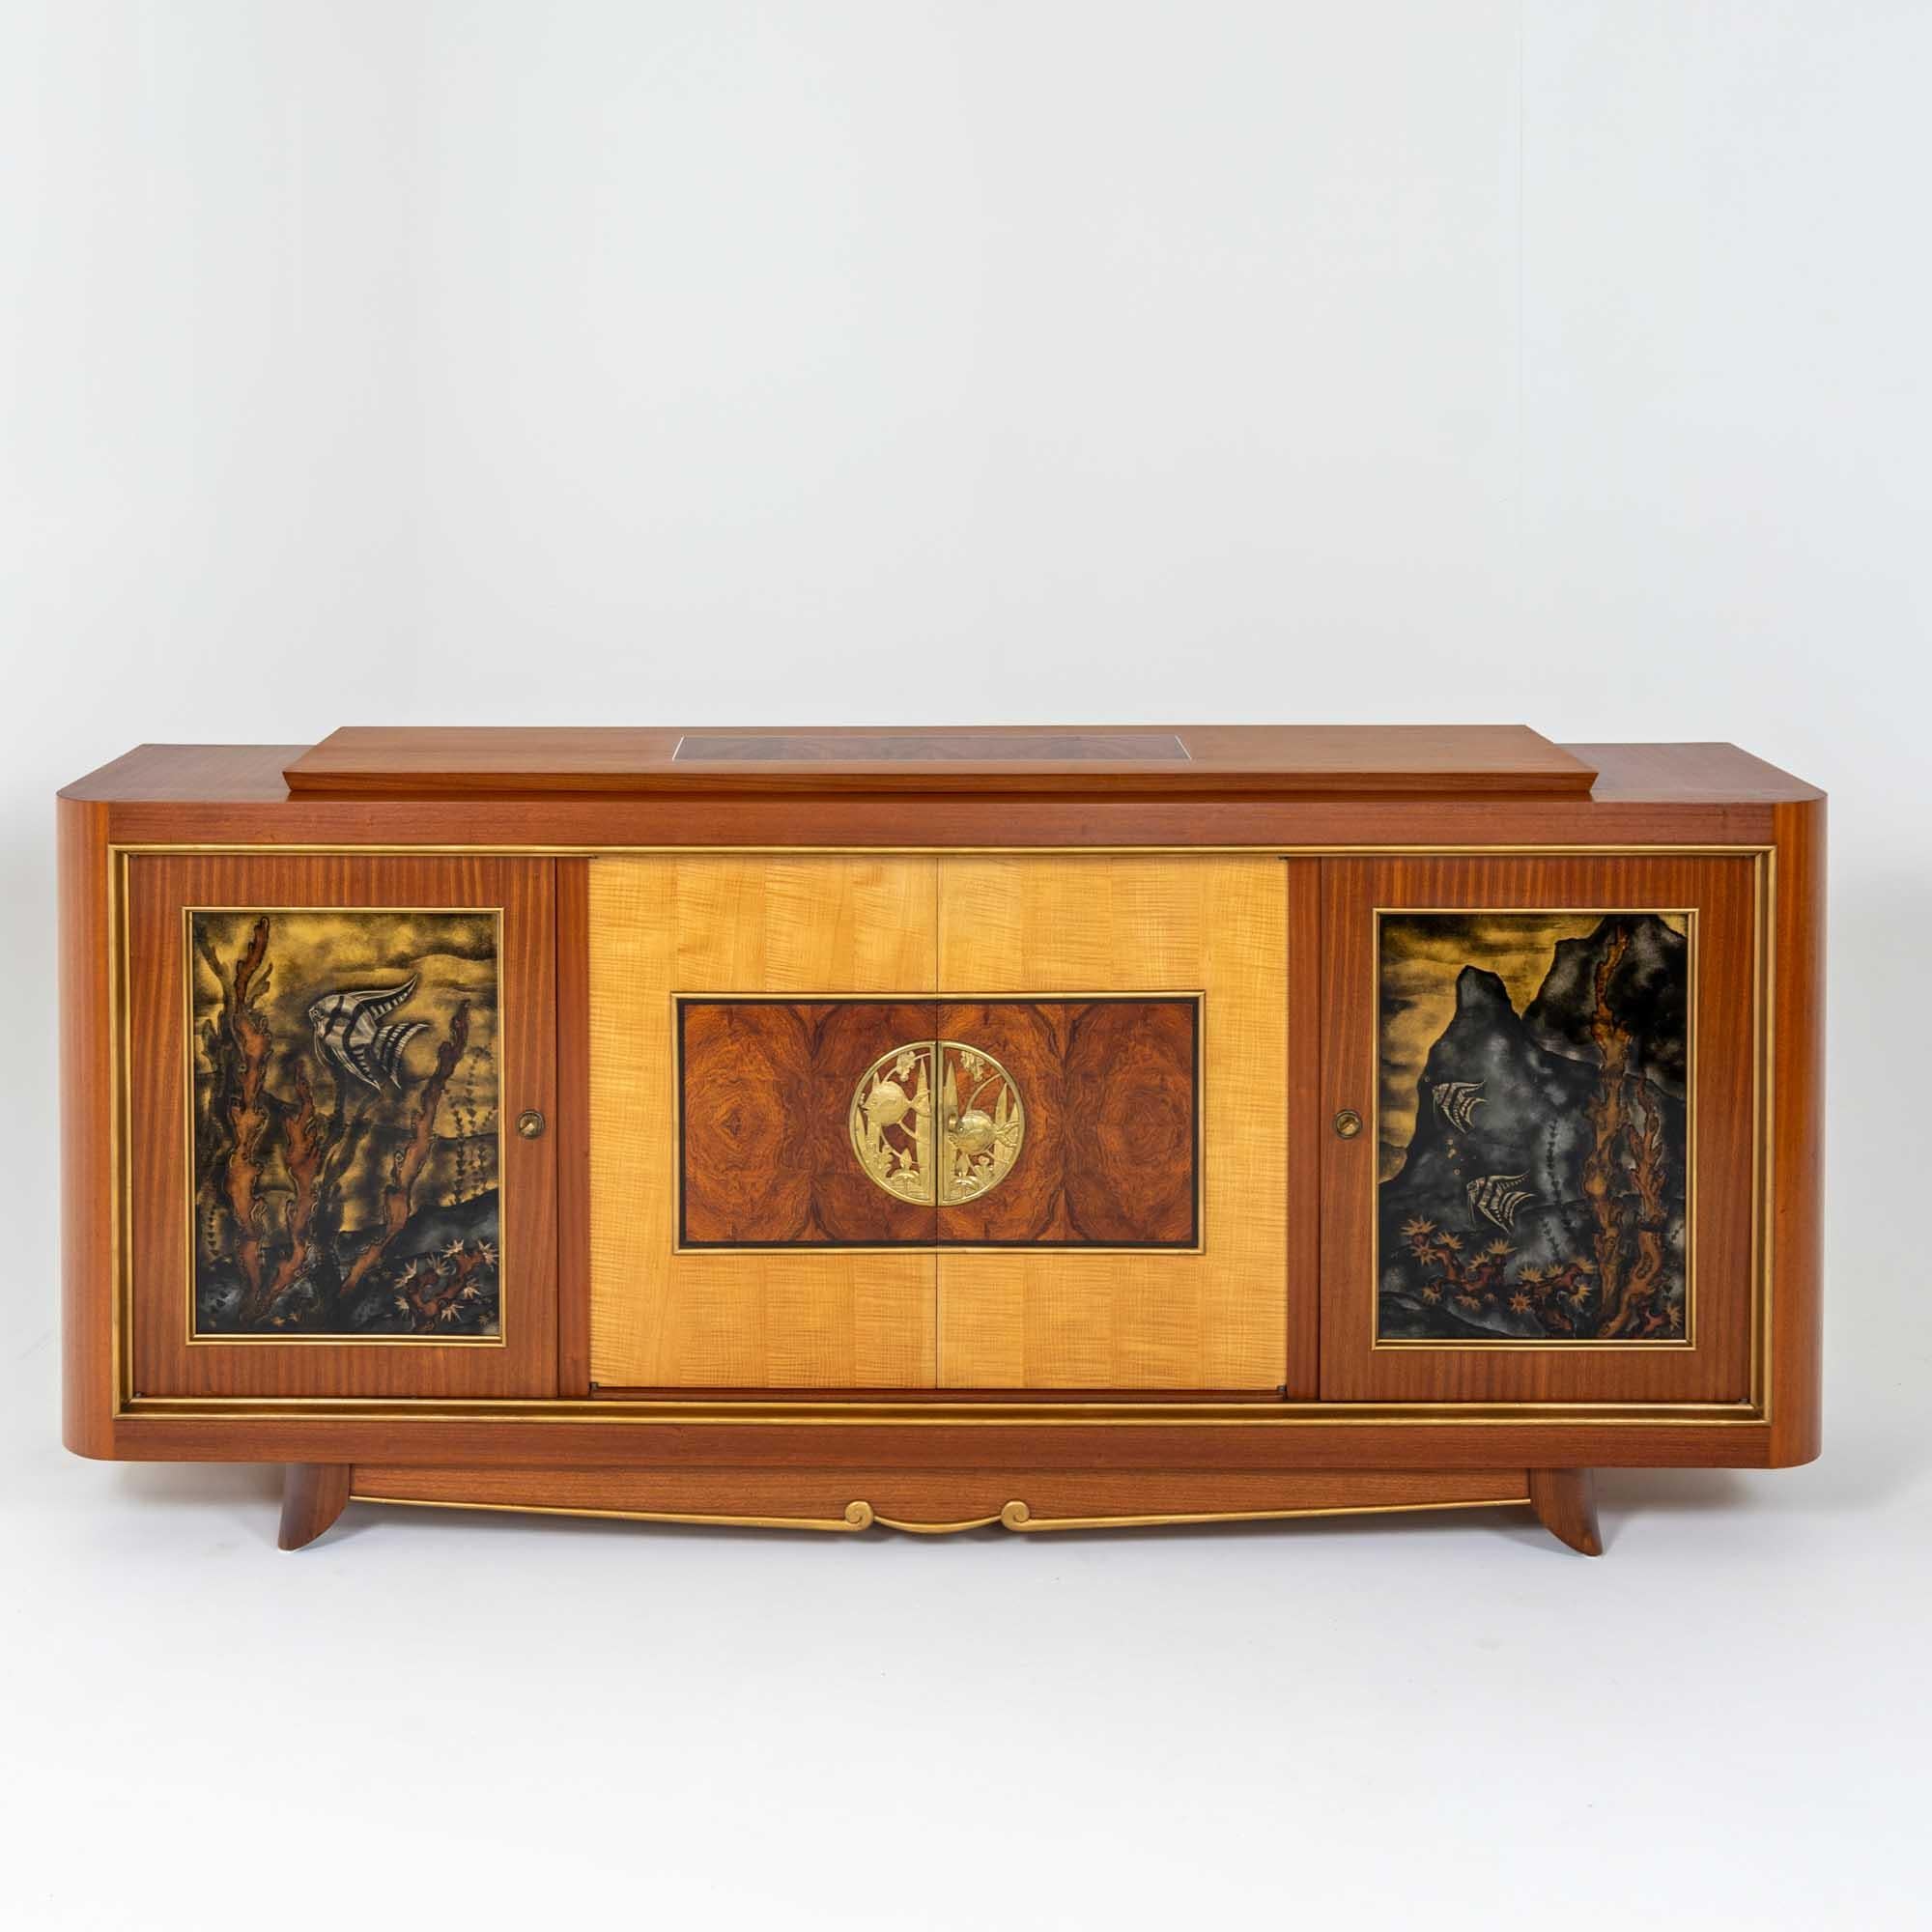 Large high quality sideboard of the French Art Deco. The sideboard stands on an elegantly executed plinth zone with brass moulding. Above it rises the four-door corpus with framing brass profiles and a contrasting veneer pattern in maple and burl.